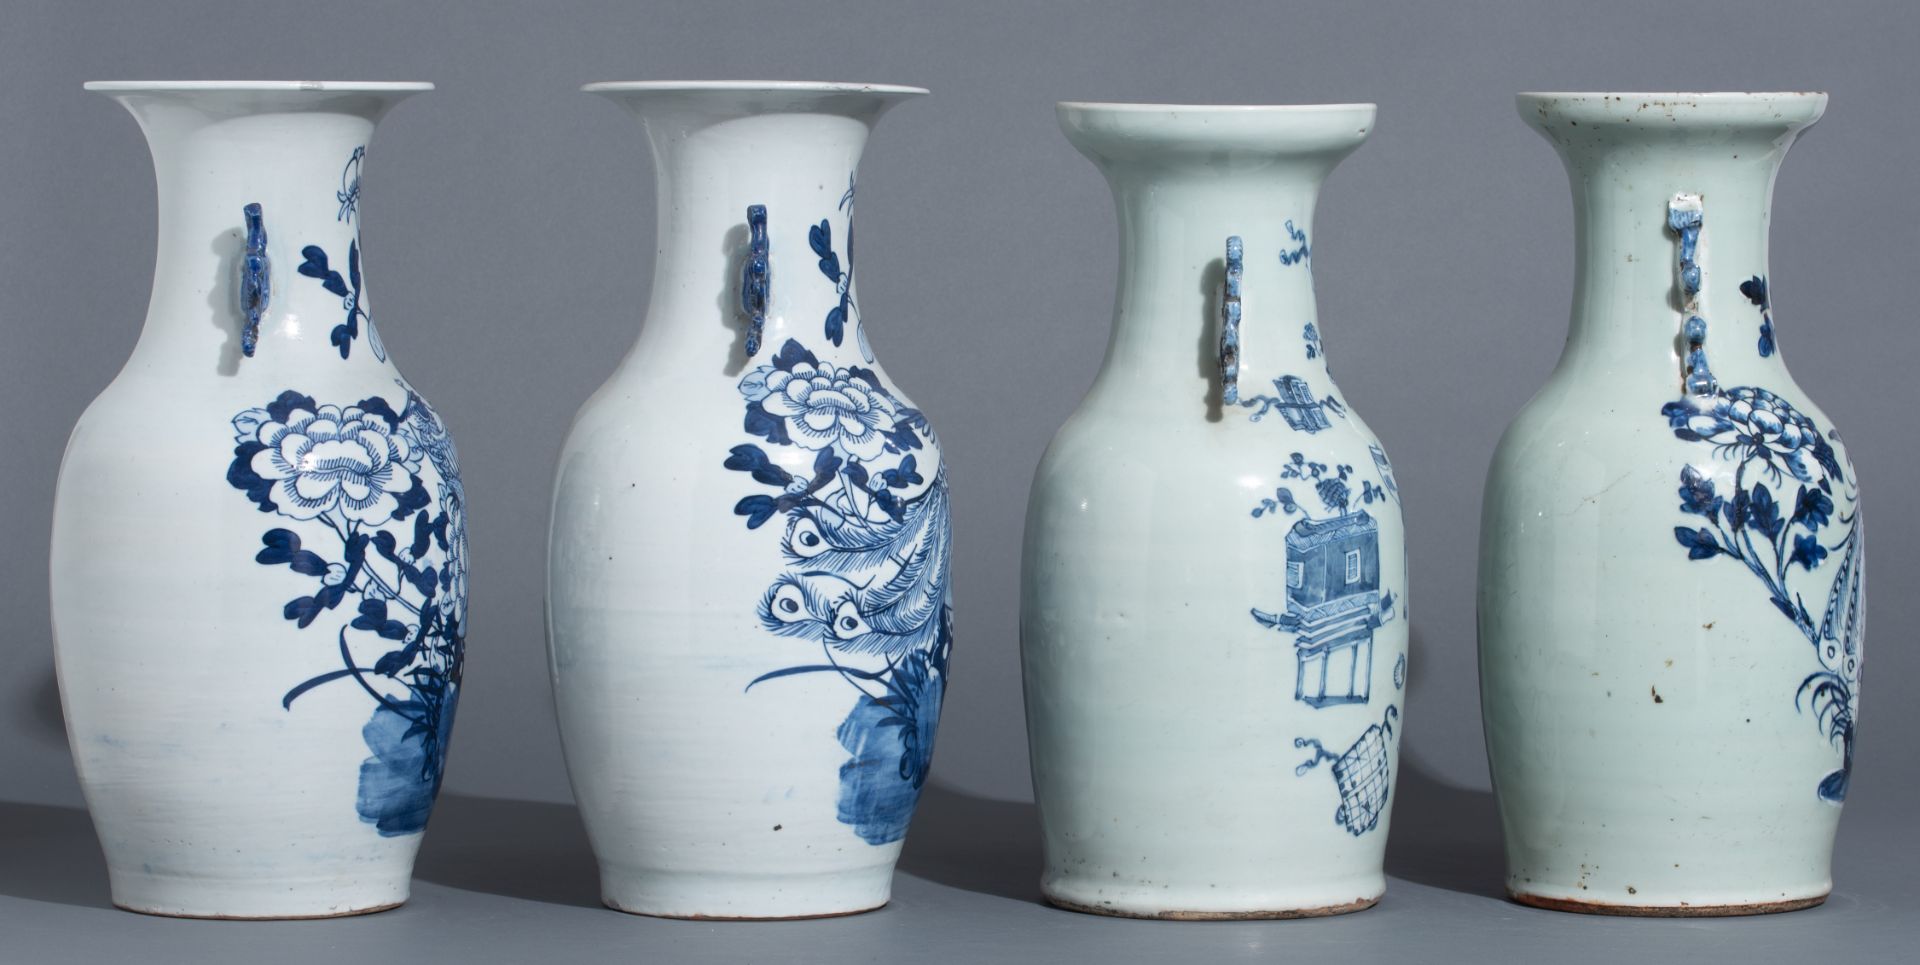 Four Chinese blue and white on celadon ground vases, late 19thC, H 42 - 43 cm - Image 31 of 52